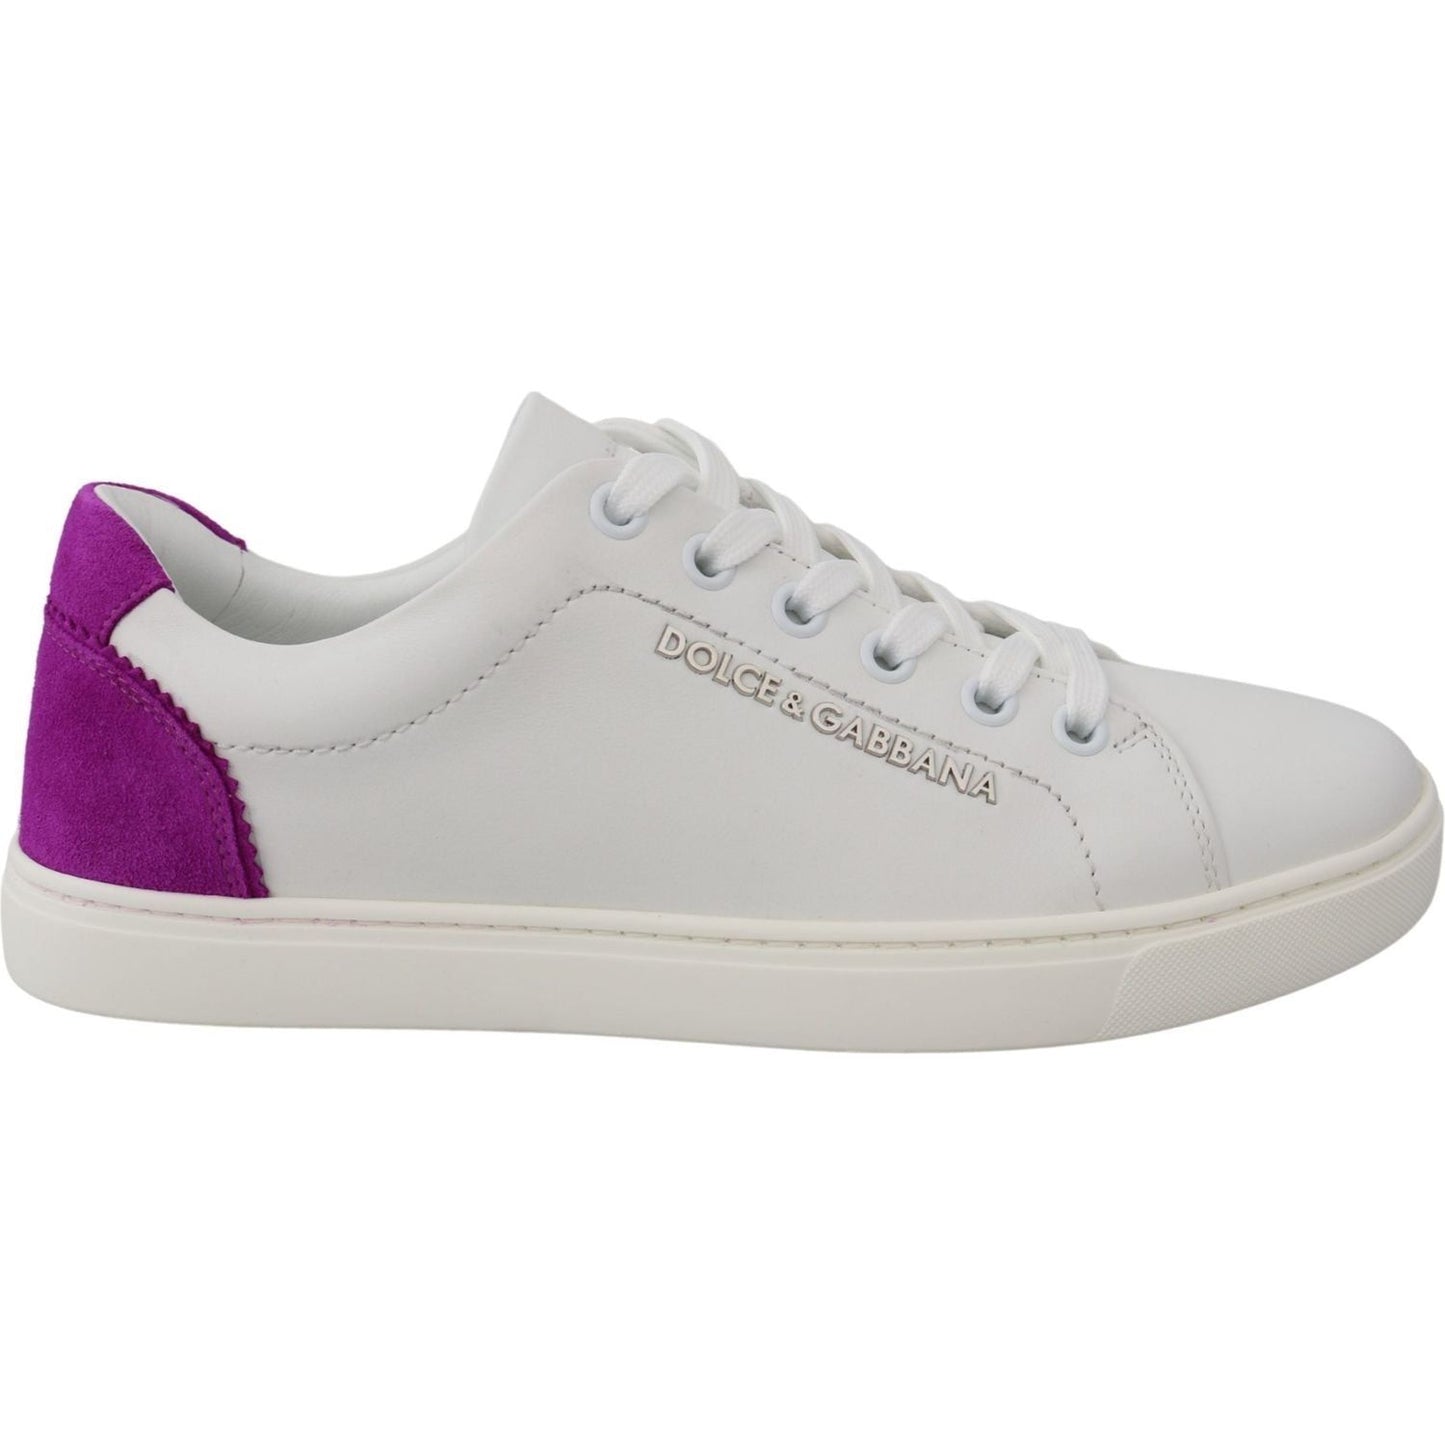 Dolce & Gabbana Chic White Leather Sneakers with Purple Accents WOMAN SNEAKERS white-purple-leather-logo-womens-shoes IMG_9737-scaled-2c51ddb9-18d.jpg